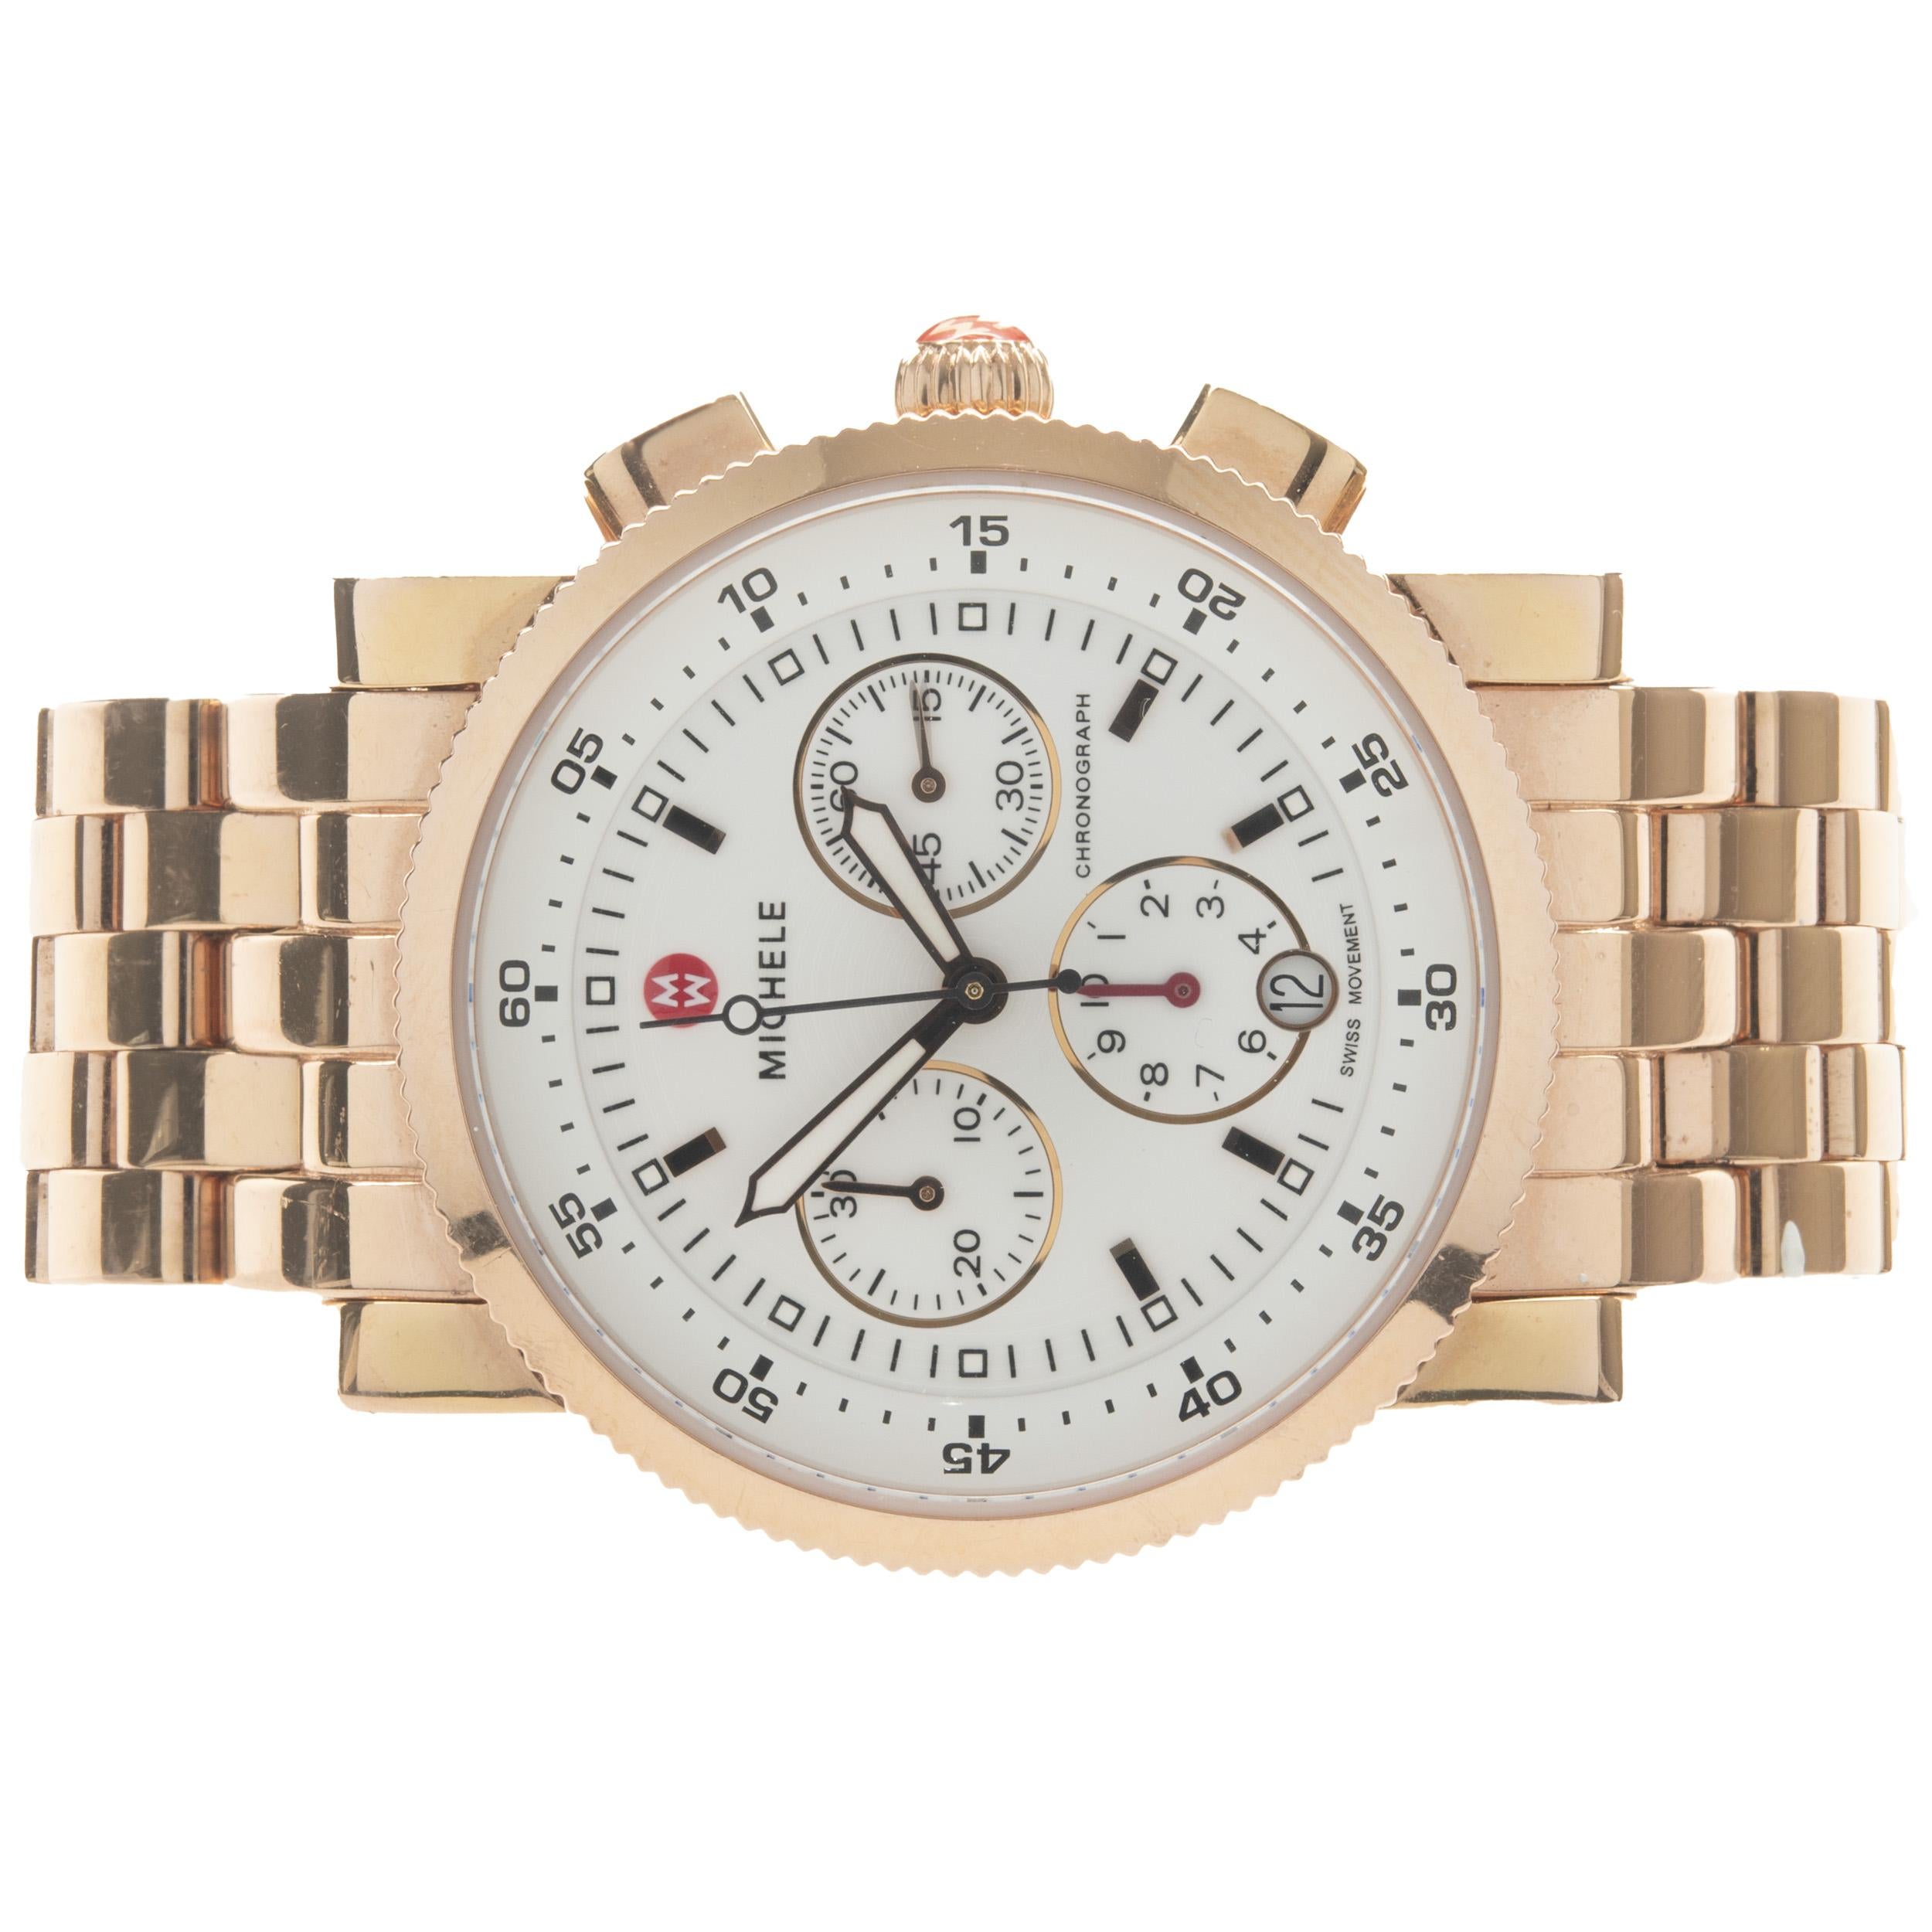 Movement: quartz
Function: hours, minutes, seconds, date, chronograph 
Case: 38mm rose stainless round case, sapphire crystal
Dial: white chronograph dial, stick hour markers 
Band: rose stainless steel sport sail link
Serial #: SS06XXX
Reference #: